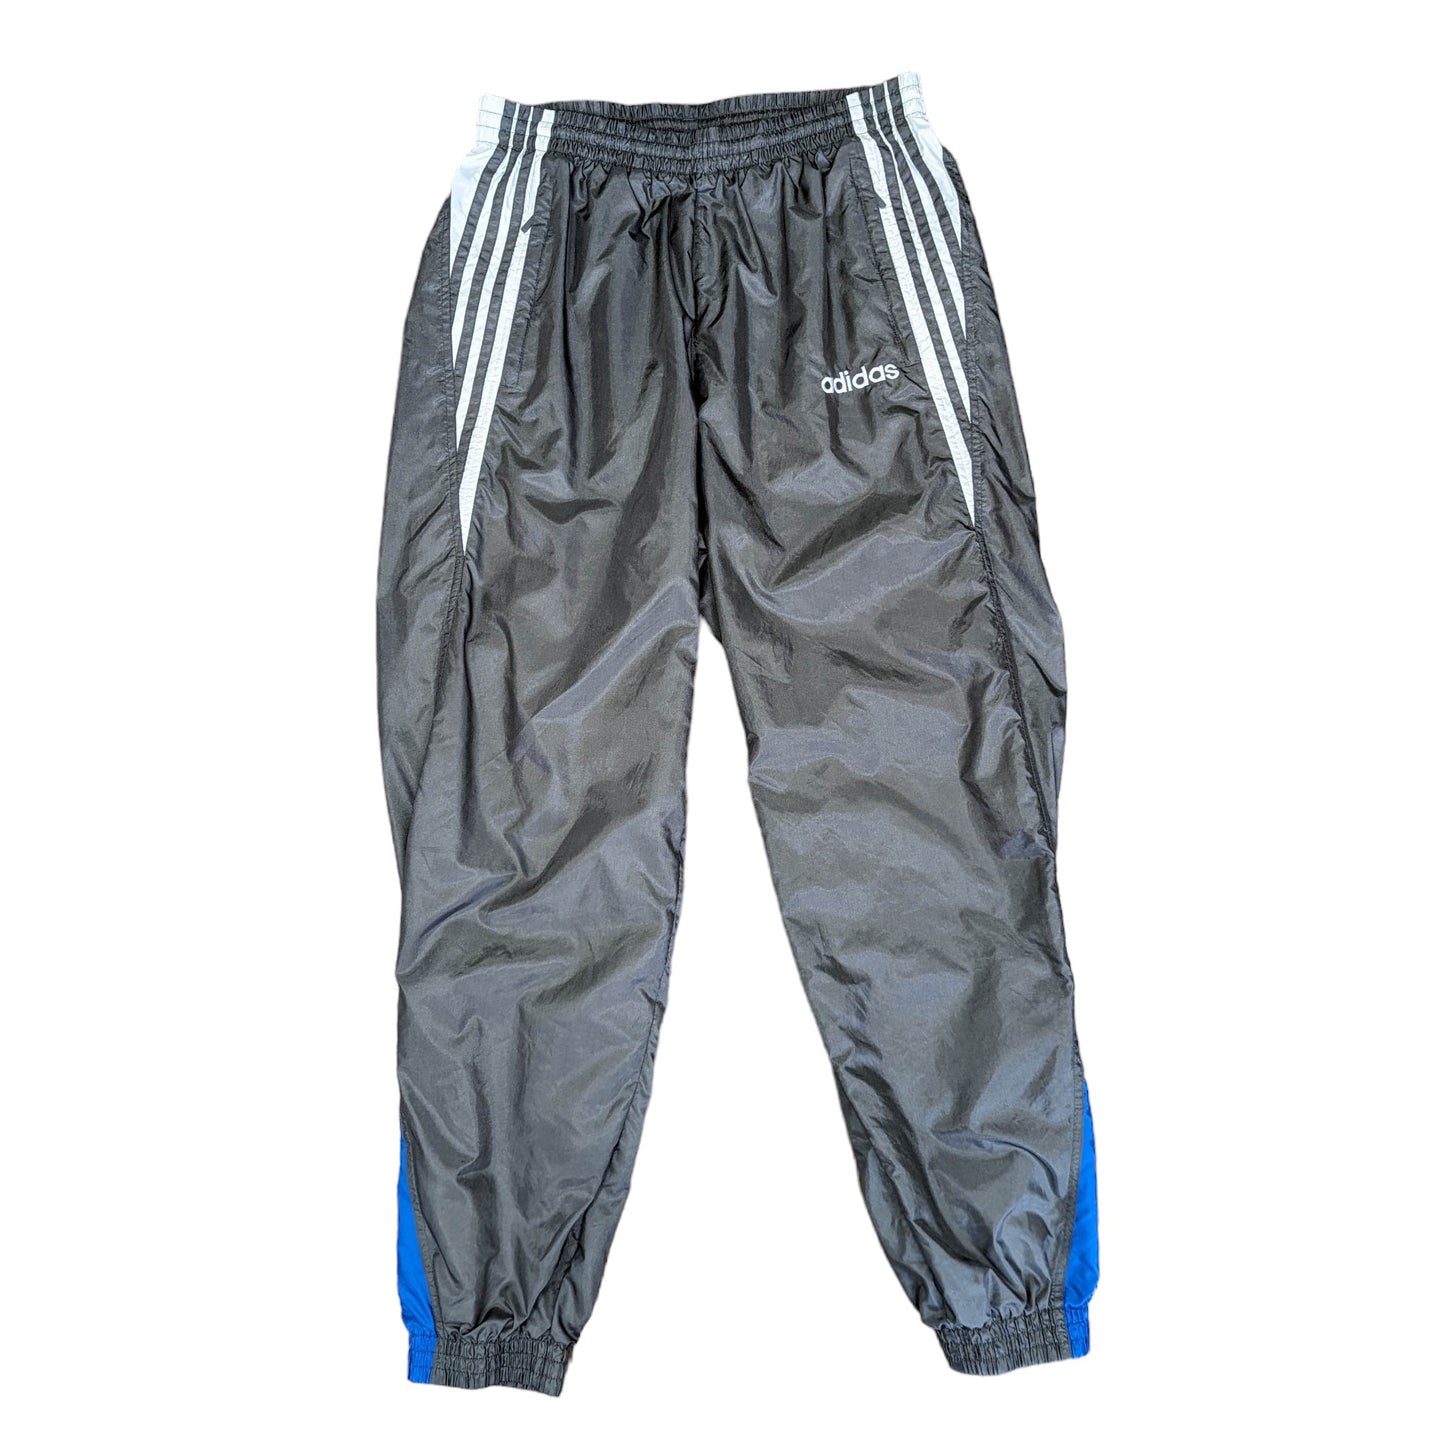 90s Adidas Joggers Size L